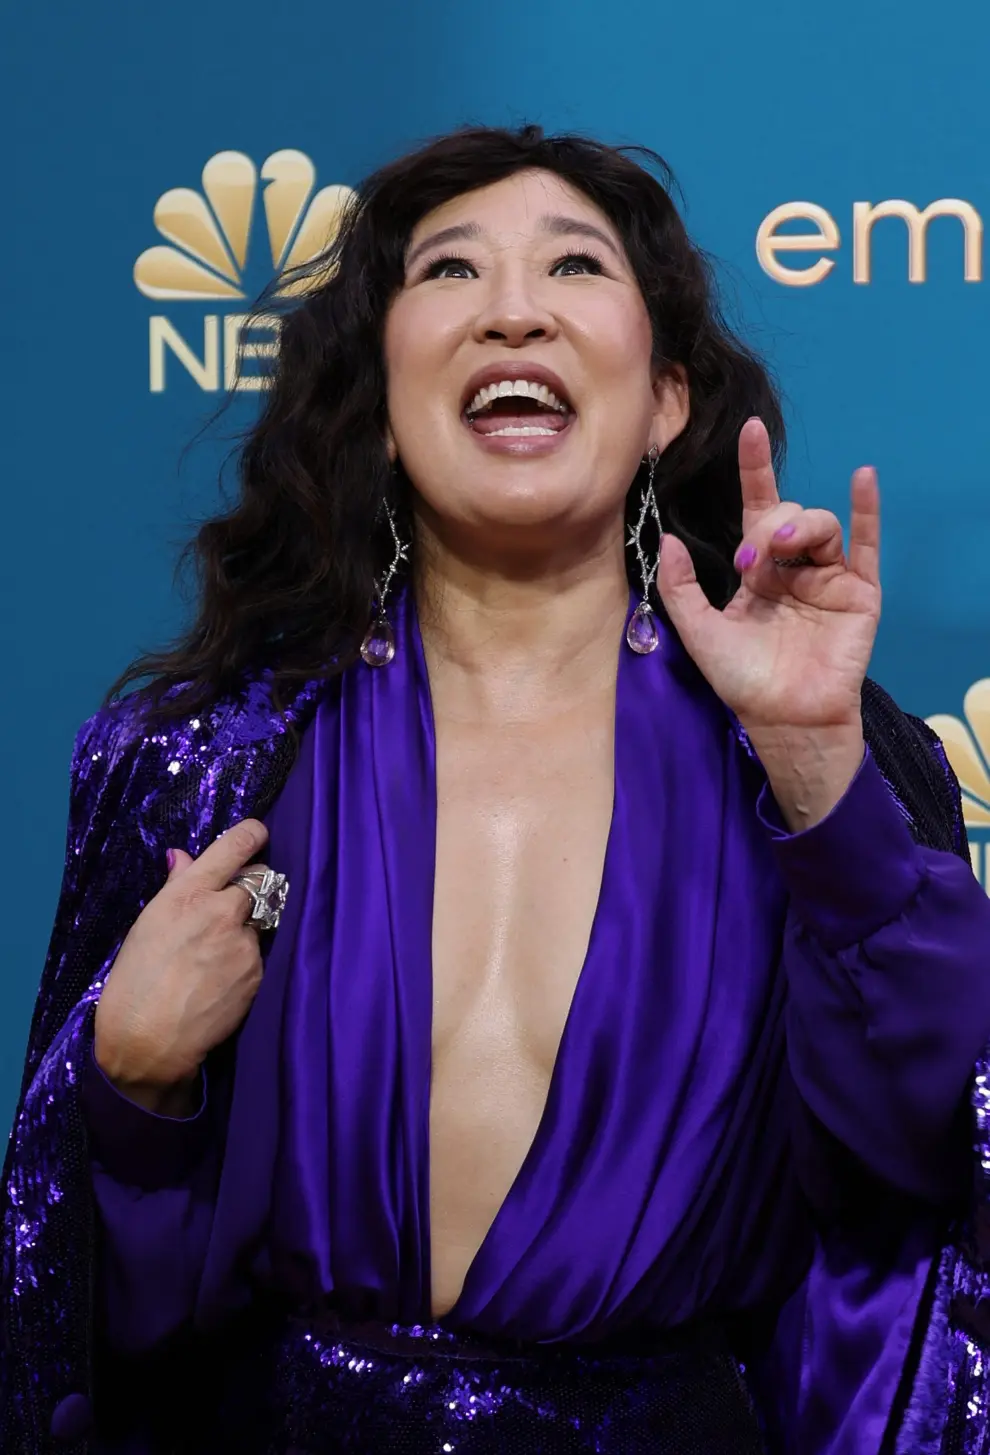 Sandra Oh arrives at the 74th Primetime Emmy Awards held at the Microsoft Theater in Los Angeles, U.S., September 12, 2022. REUTERS/Aude Guerrucci AWARDS-EMMYS/